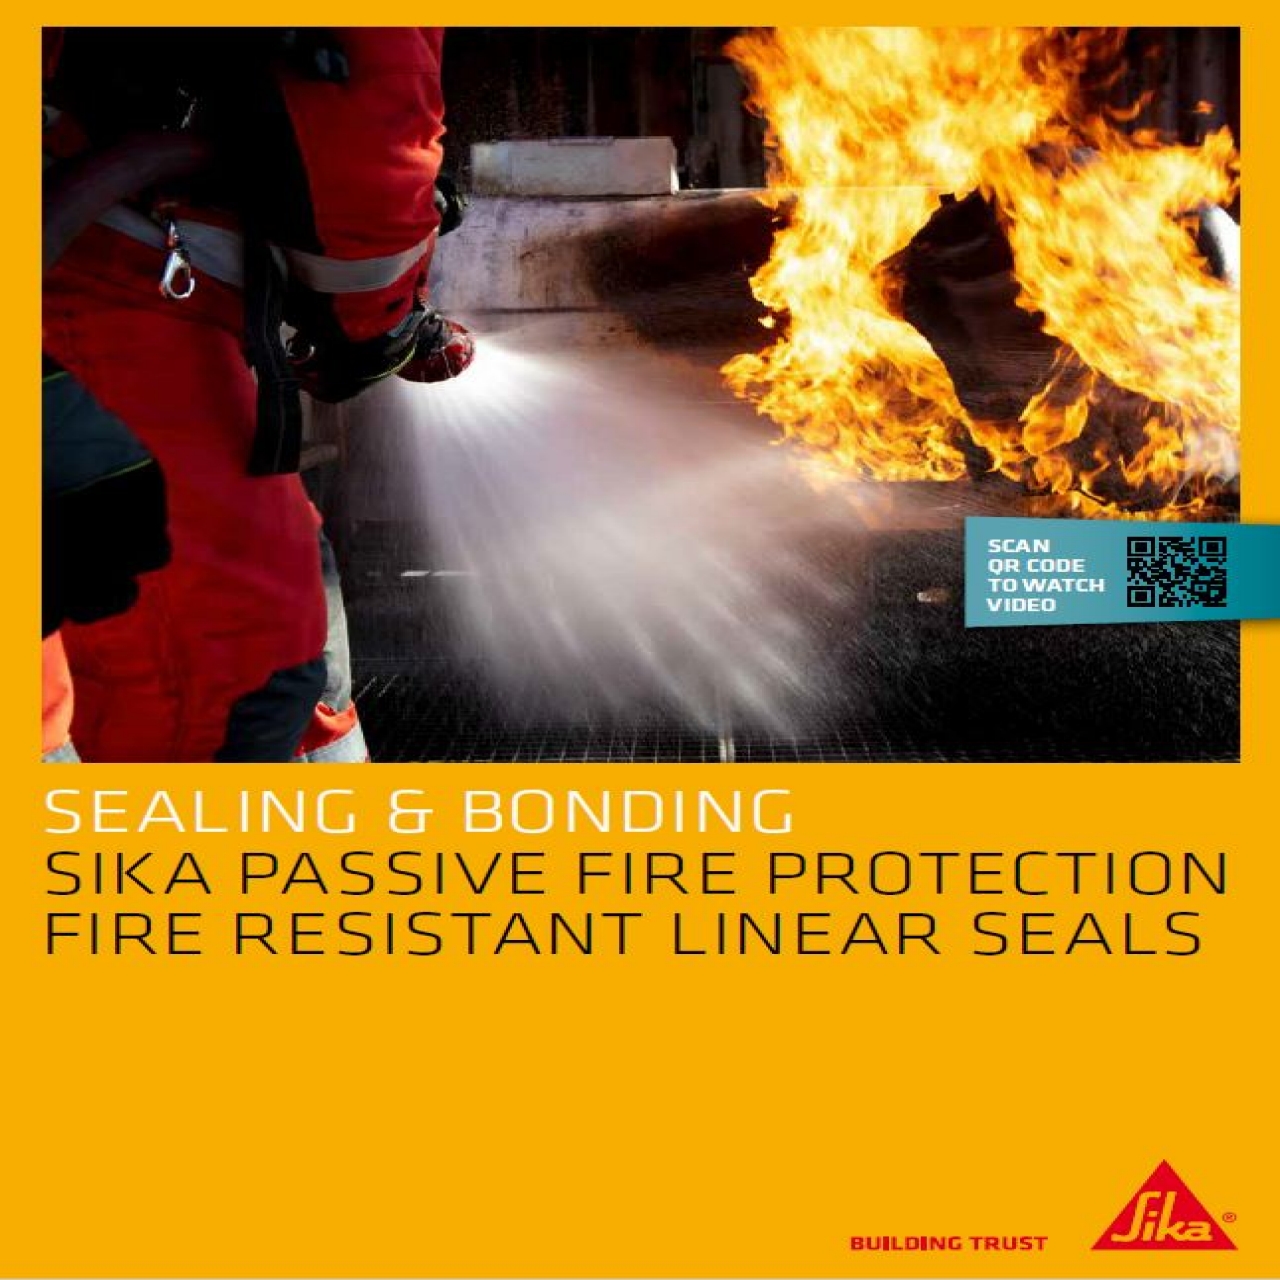 Sika Passive Fire Protection Linear Seals